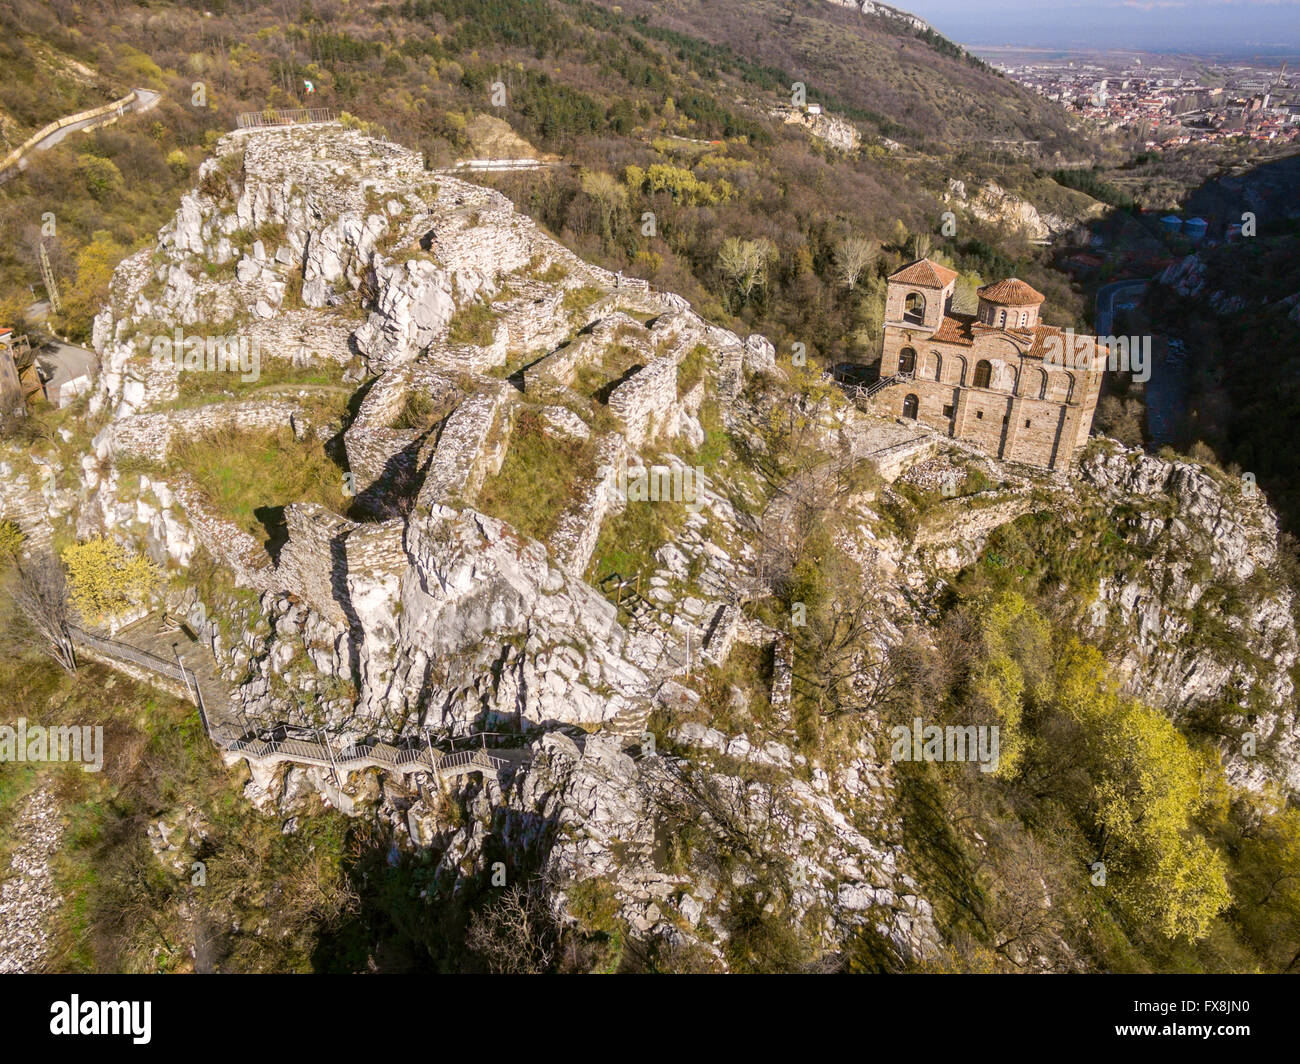 Areal veiw of the Asen's fortress and the Virgin Mary church with Asenovgrad city in the background. Stock Photo